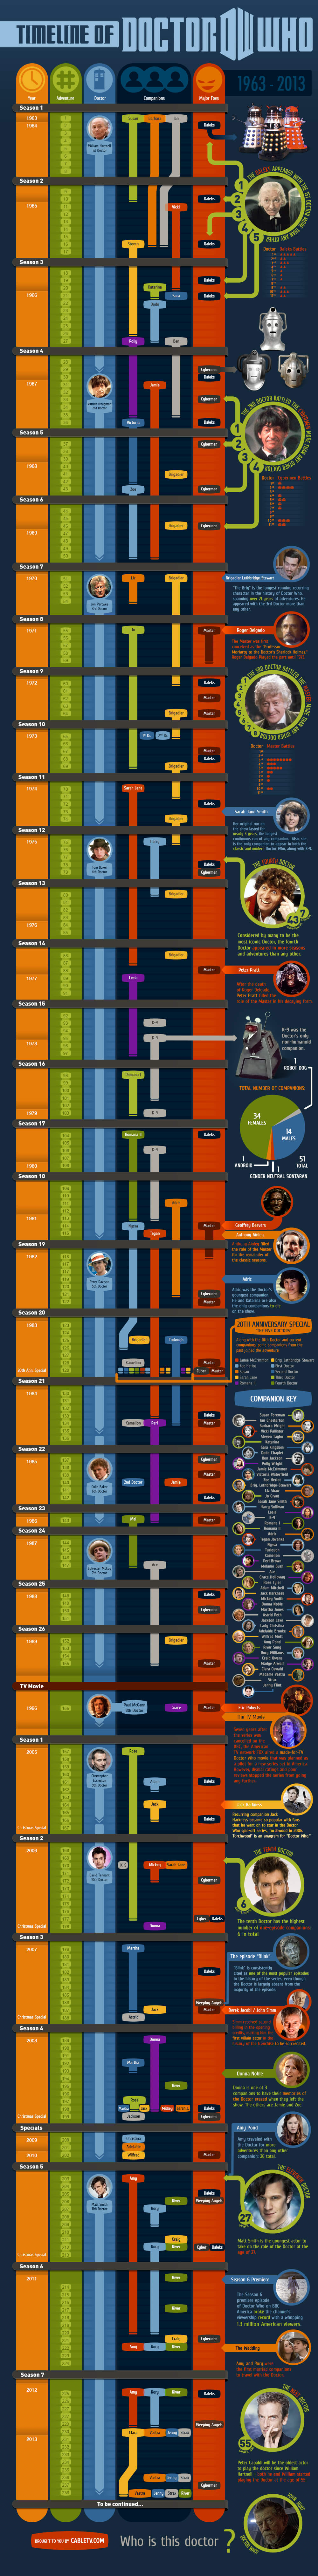 Infographic of the timeline of Doctor Who from 1963-2013